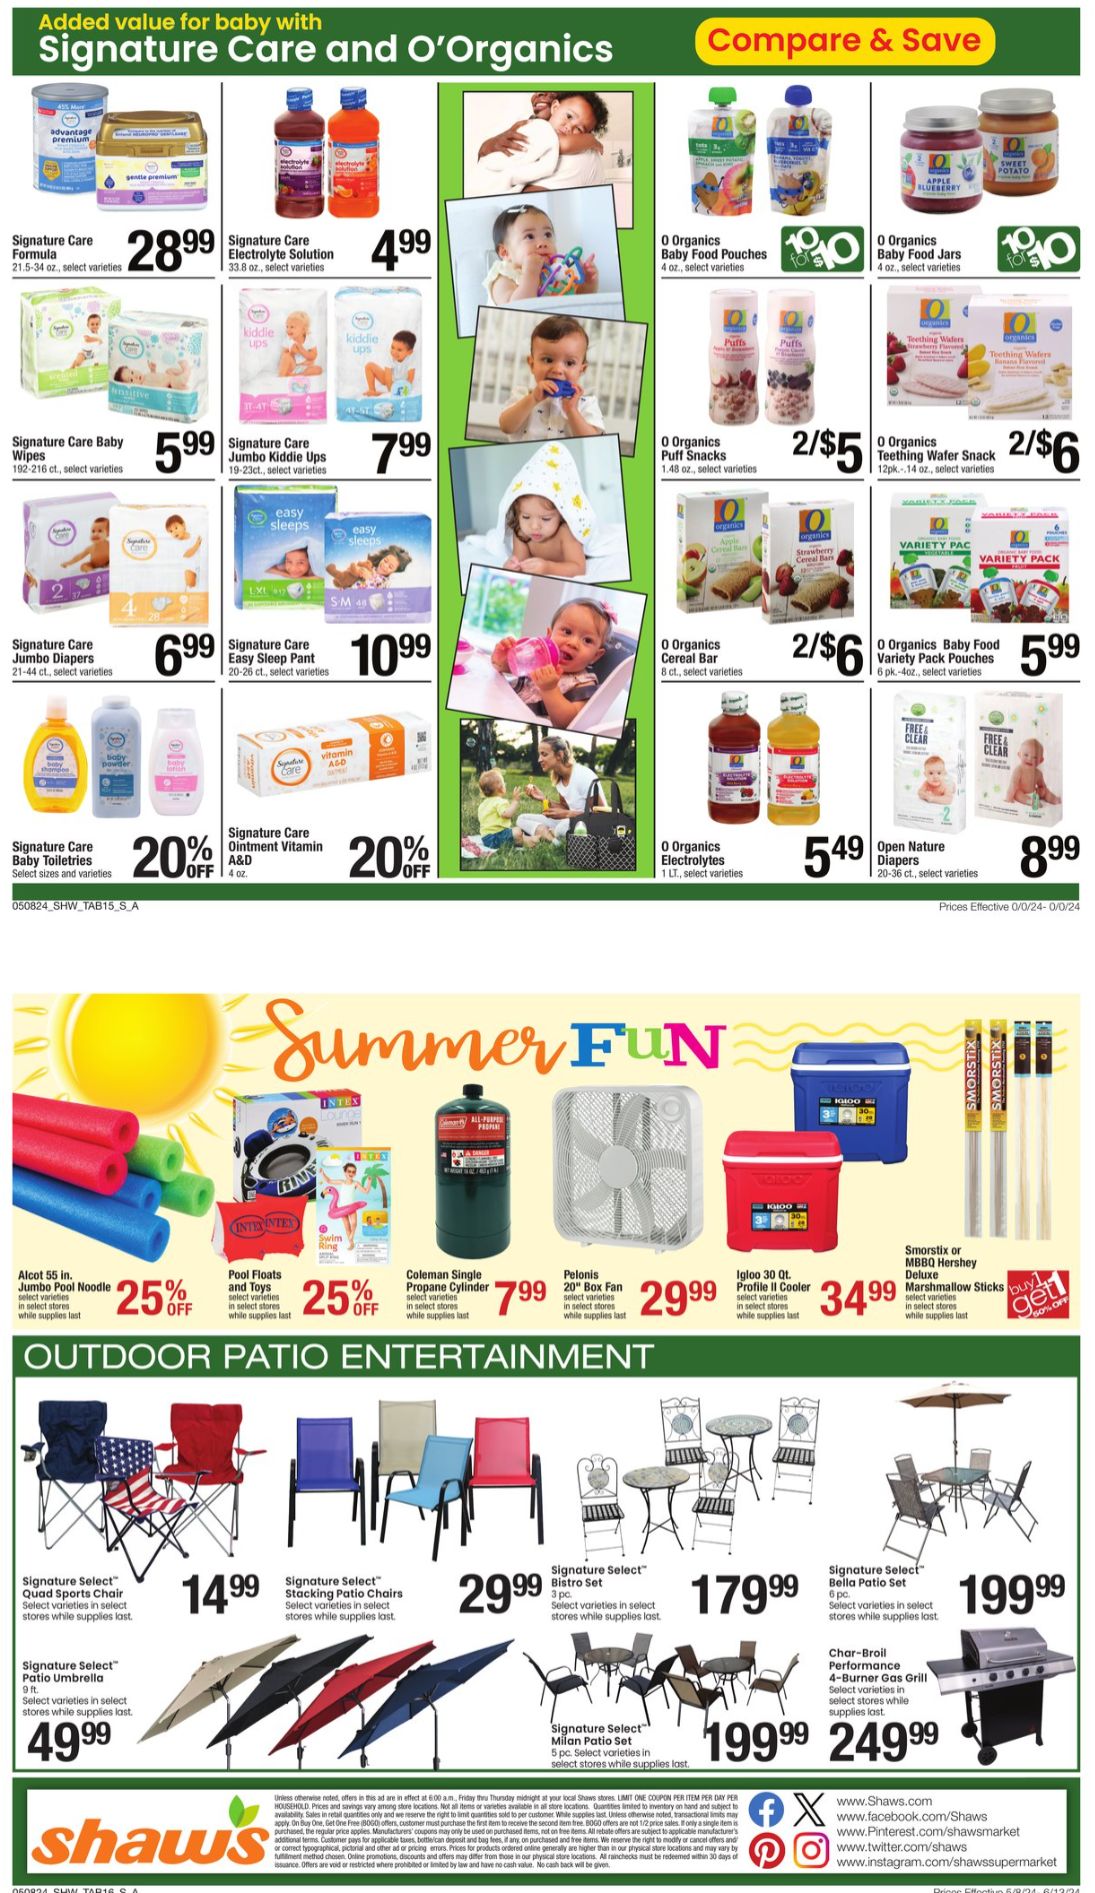 Shaw's Weekly Ad July 2024 Weekly Sales, Deals, Discounts and Digital Coupons.